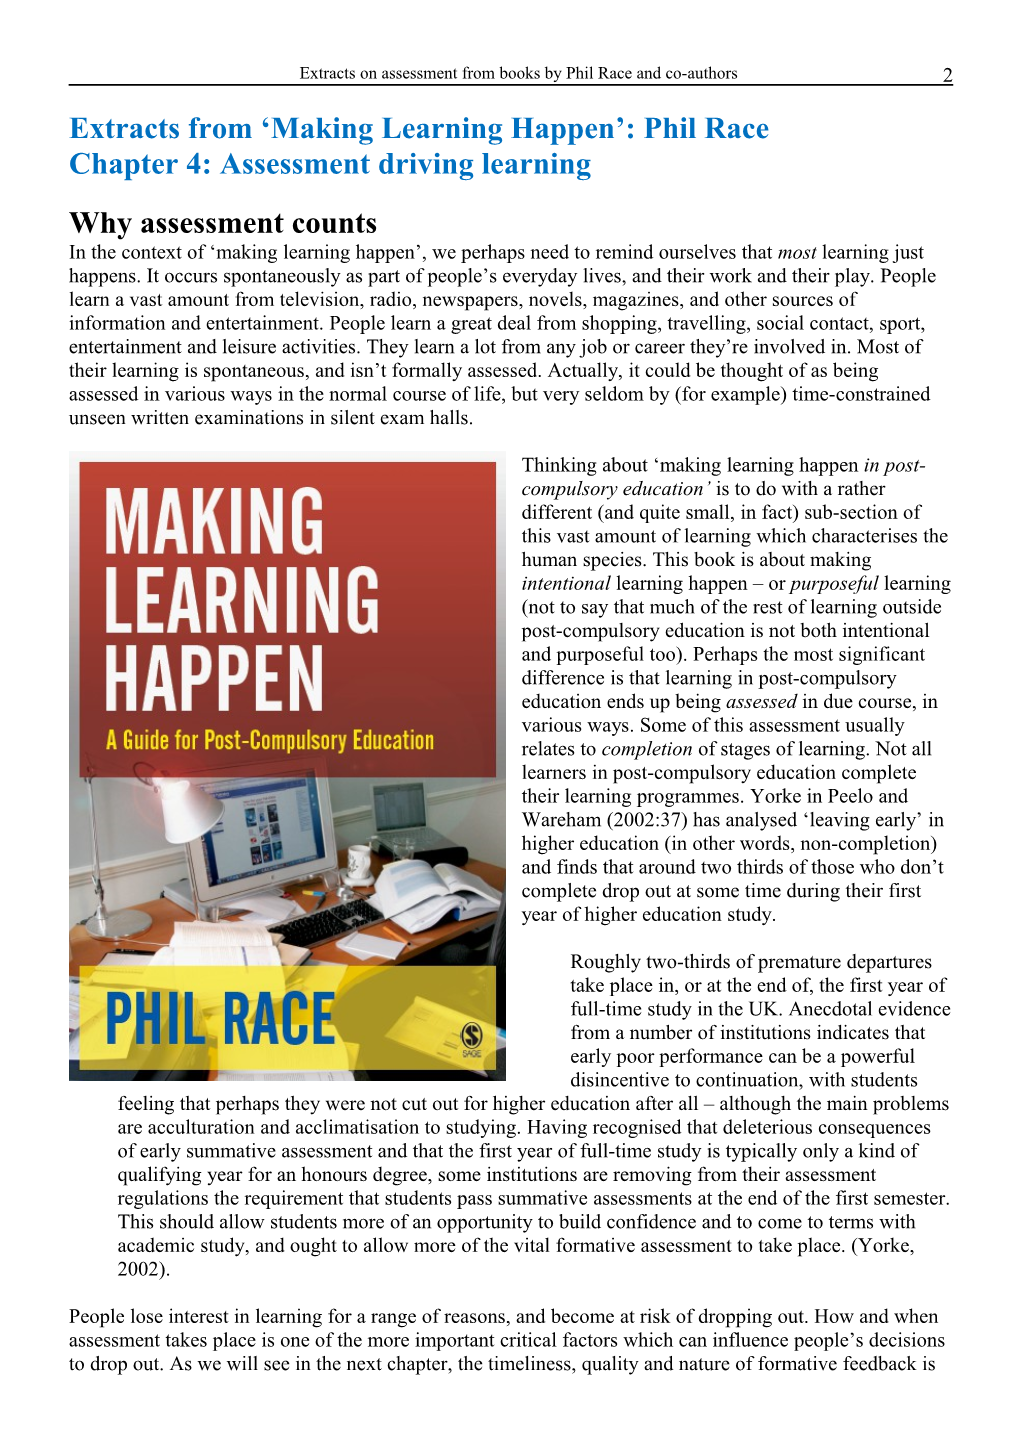 Extracts on Assessment from Books by Phil Race and Co-Authors